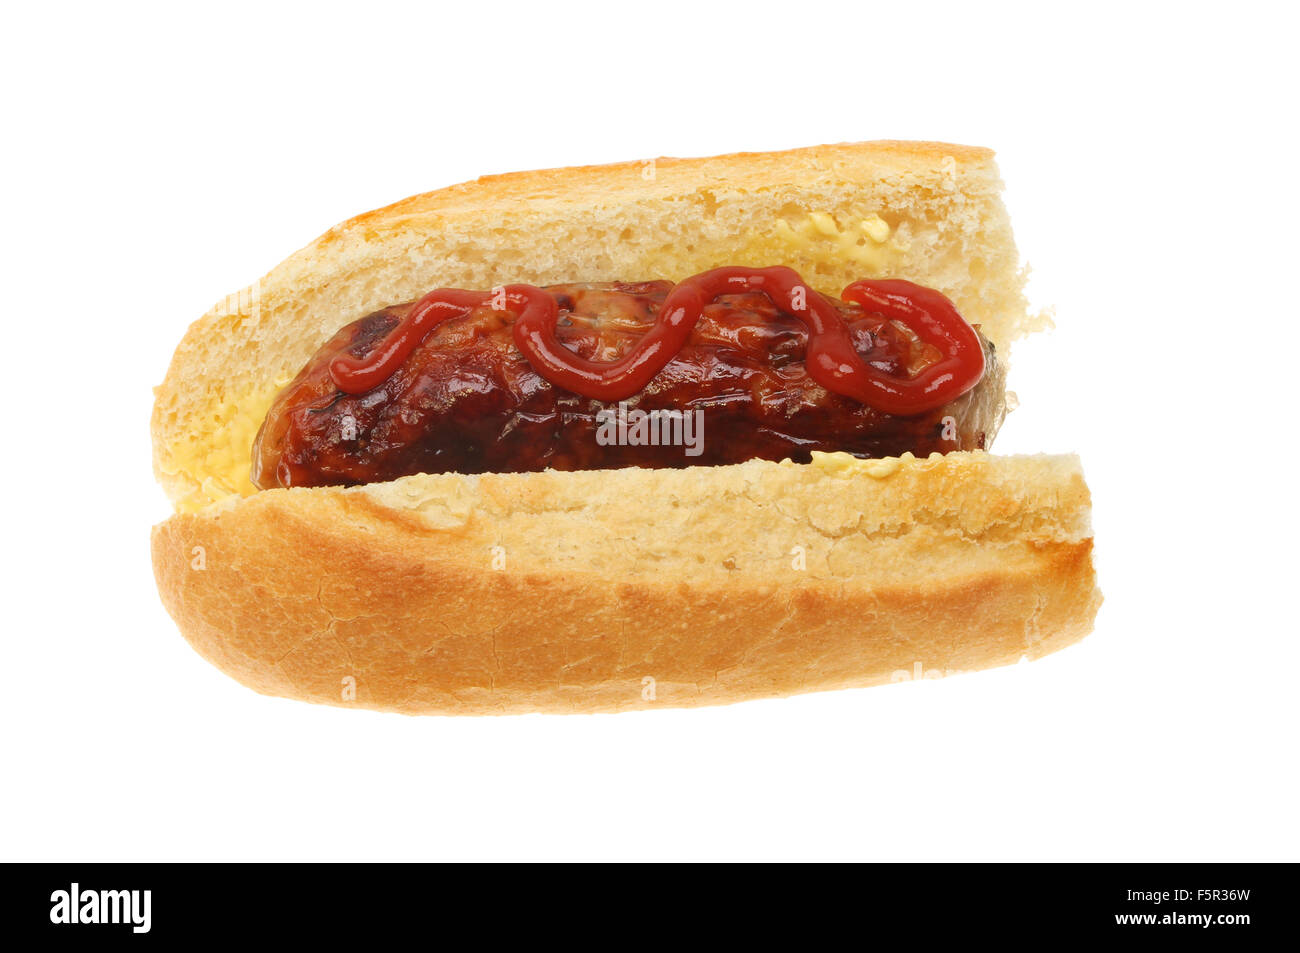 Sausage with tomato ketchup in a baguette isolated against white Stock Photo